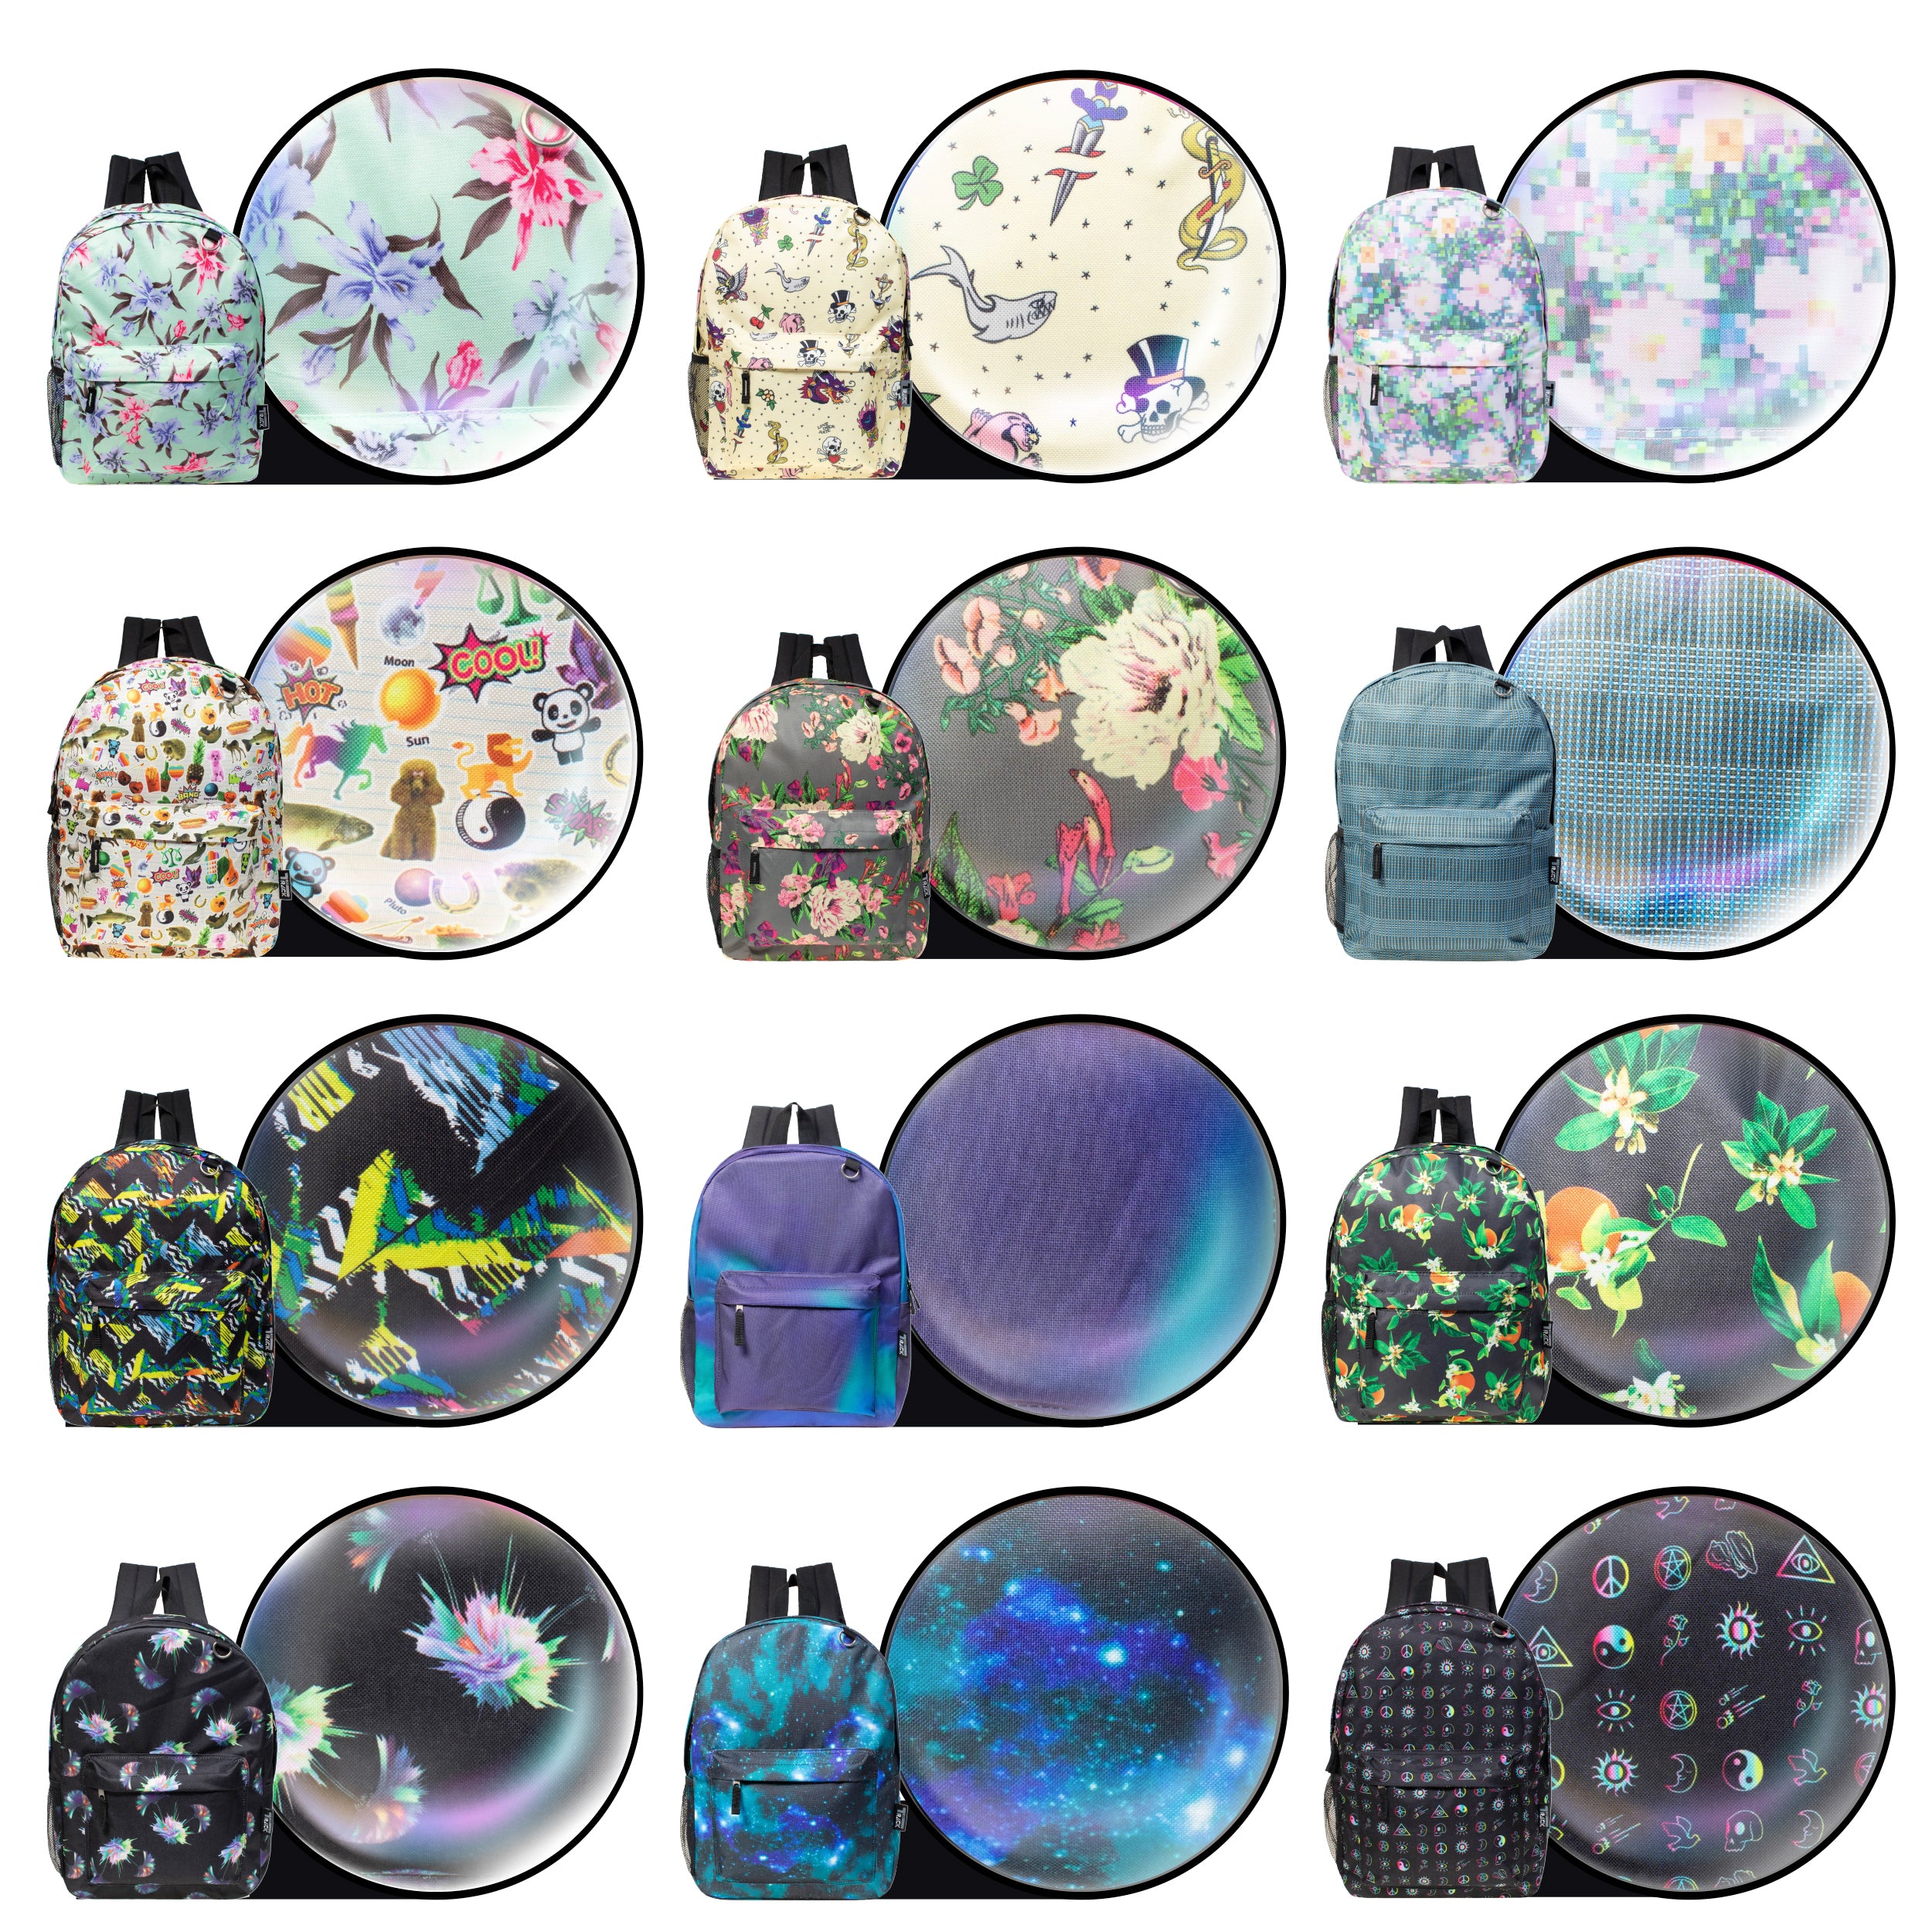 17" Kids Wholesale Backpacks - Assorted Colors and Prints, Wholesale Case of 24 Bookbags